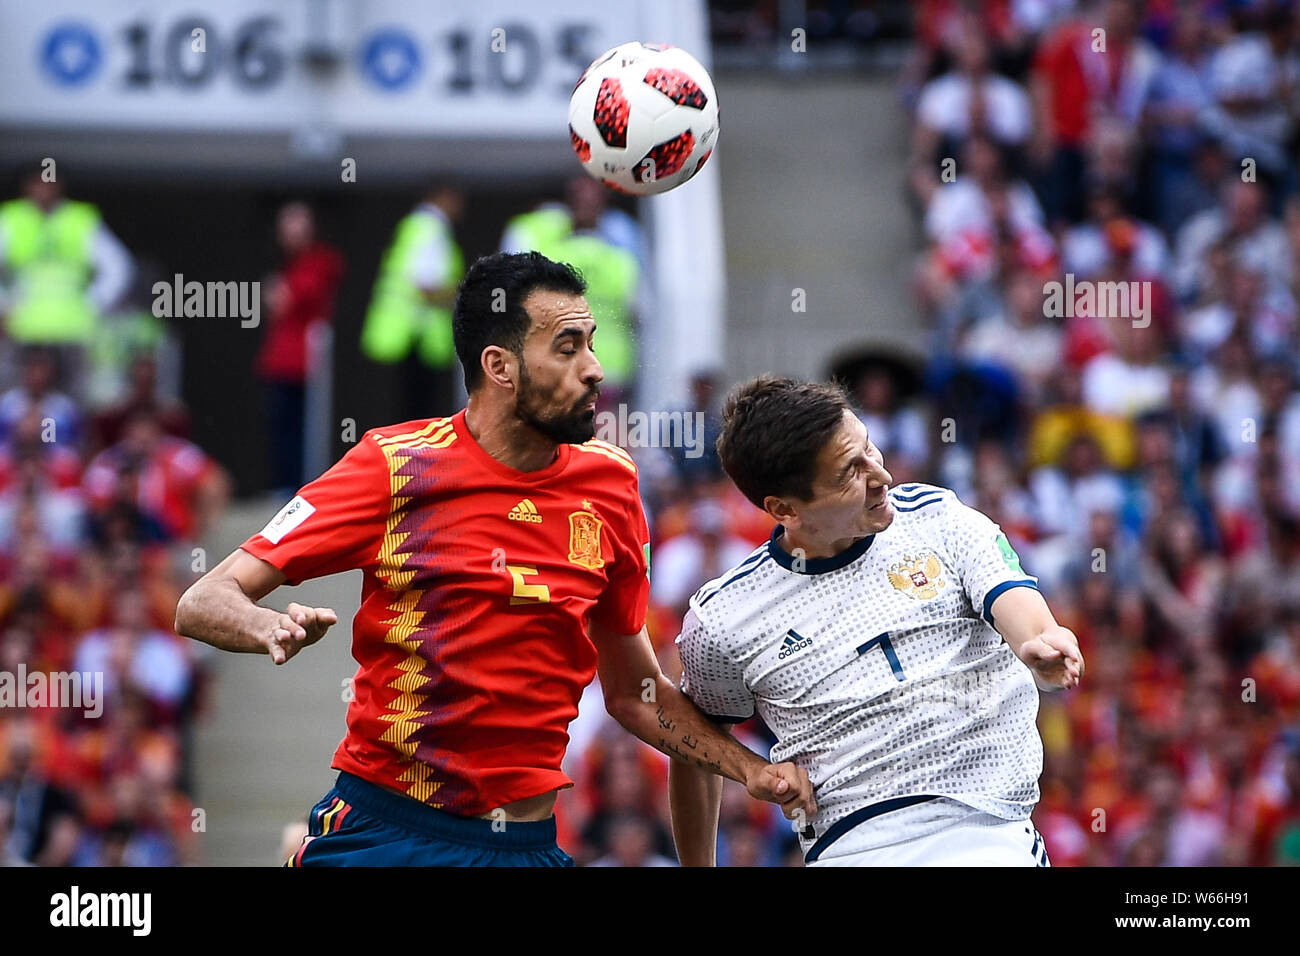 Daler Kuzyayev of Russia, right, heads the ball against Sergio Busquets of Spain in their Round of 16 match during the 2018 FIFA World Cup in Moscow, Stock Photo